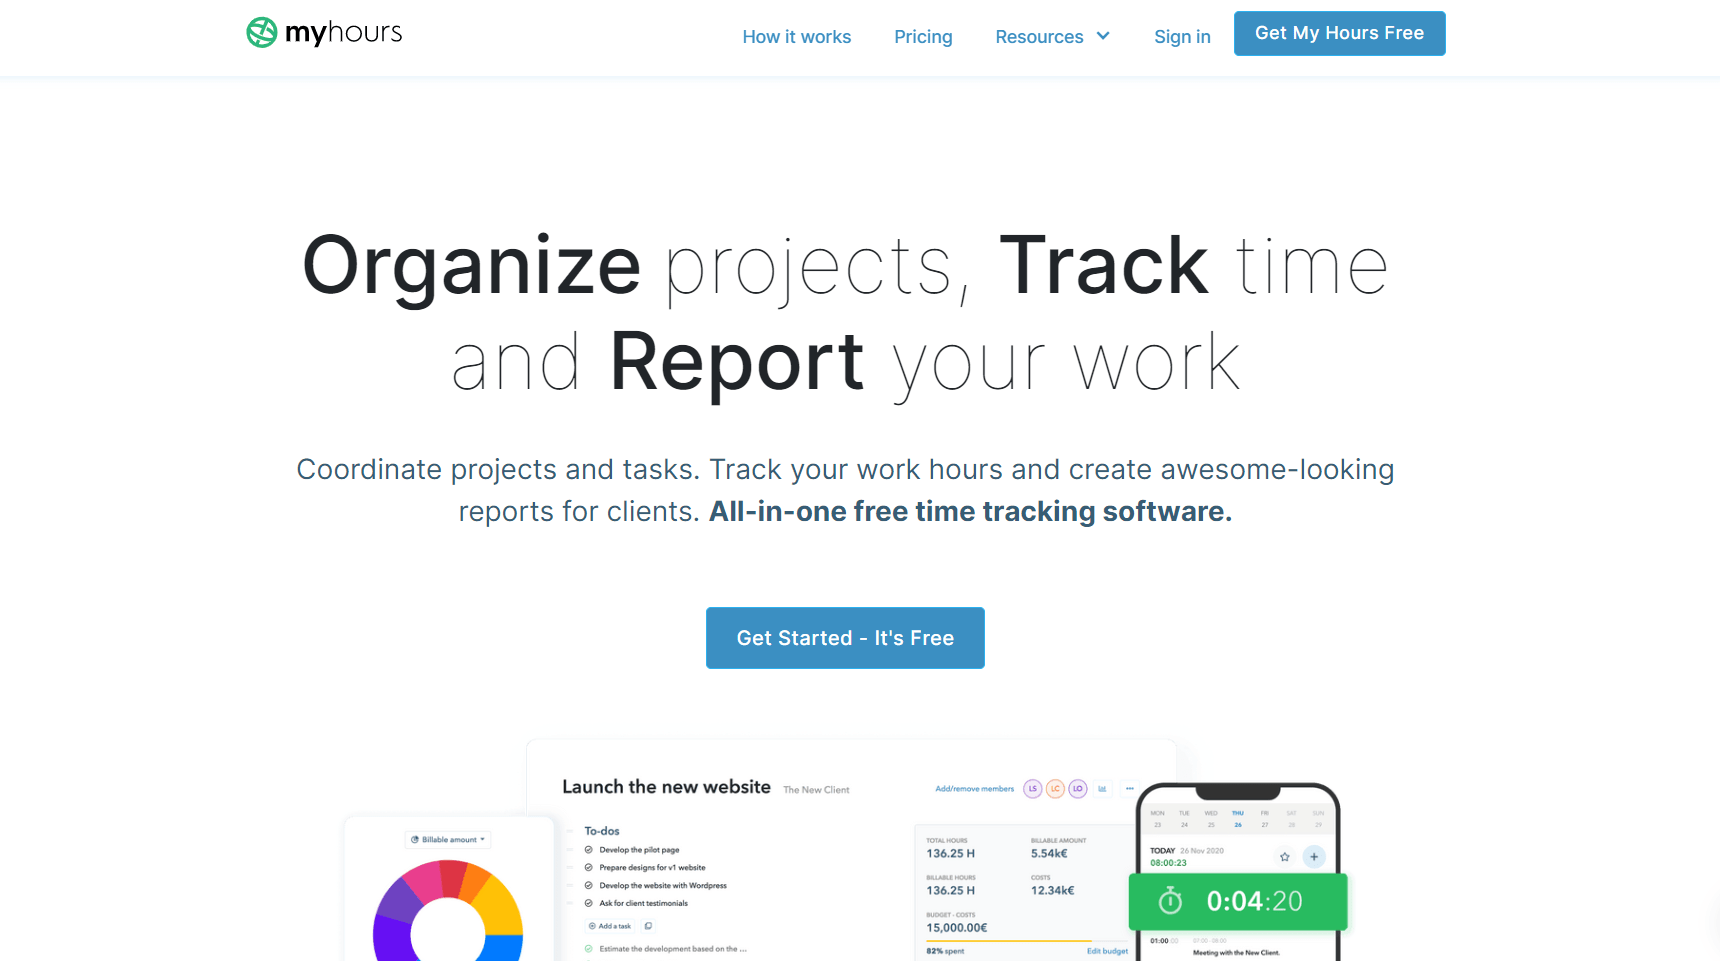 myhours' homepage, with caption "Organize project, track time"